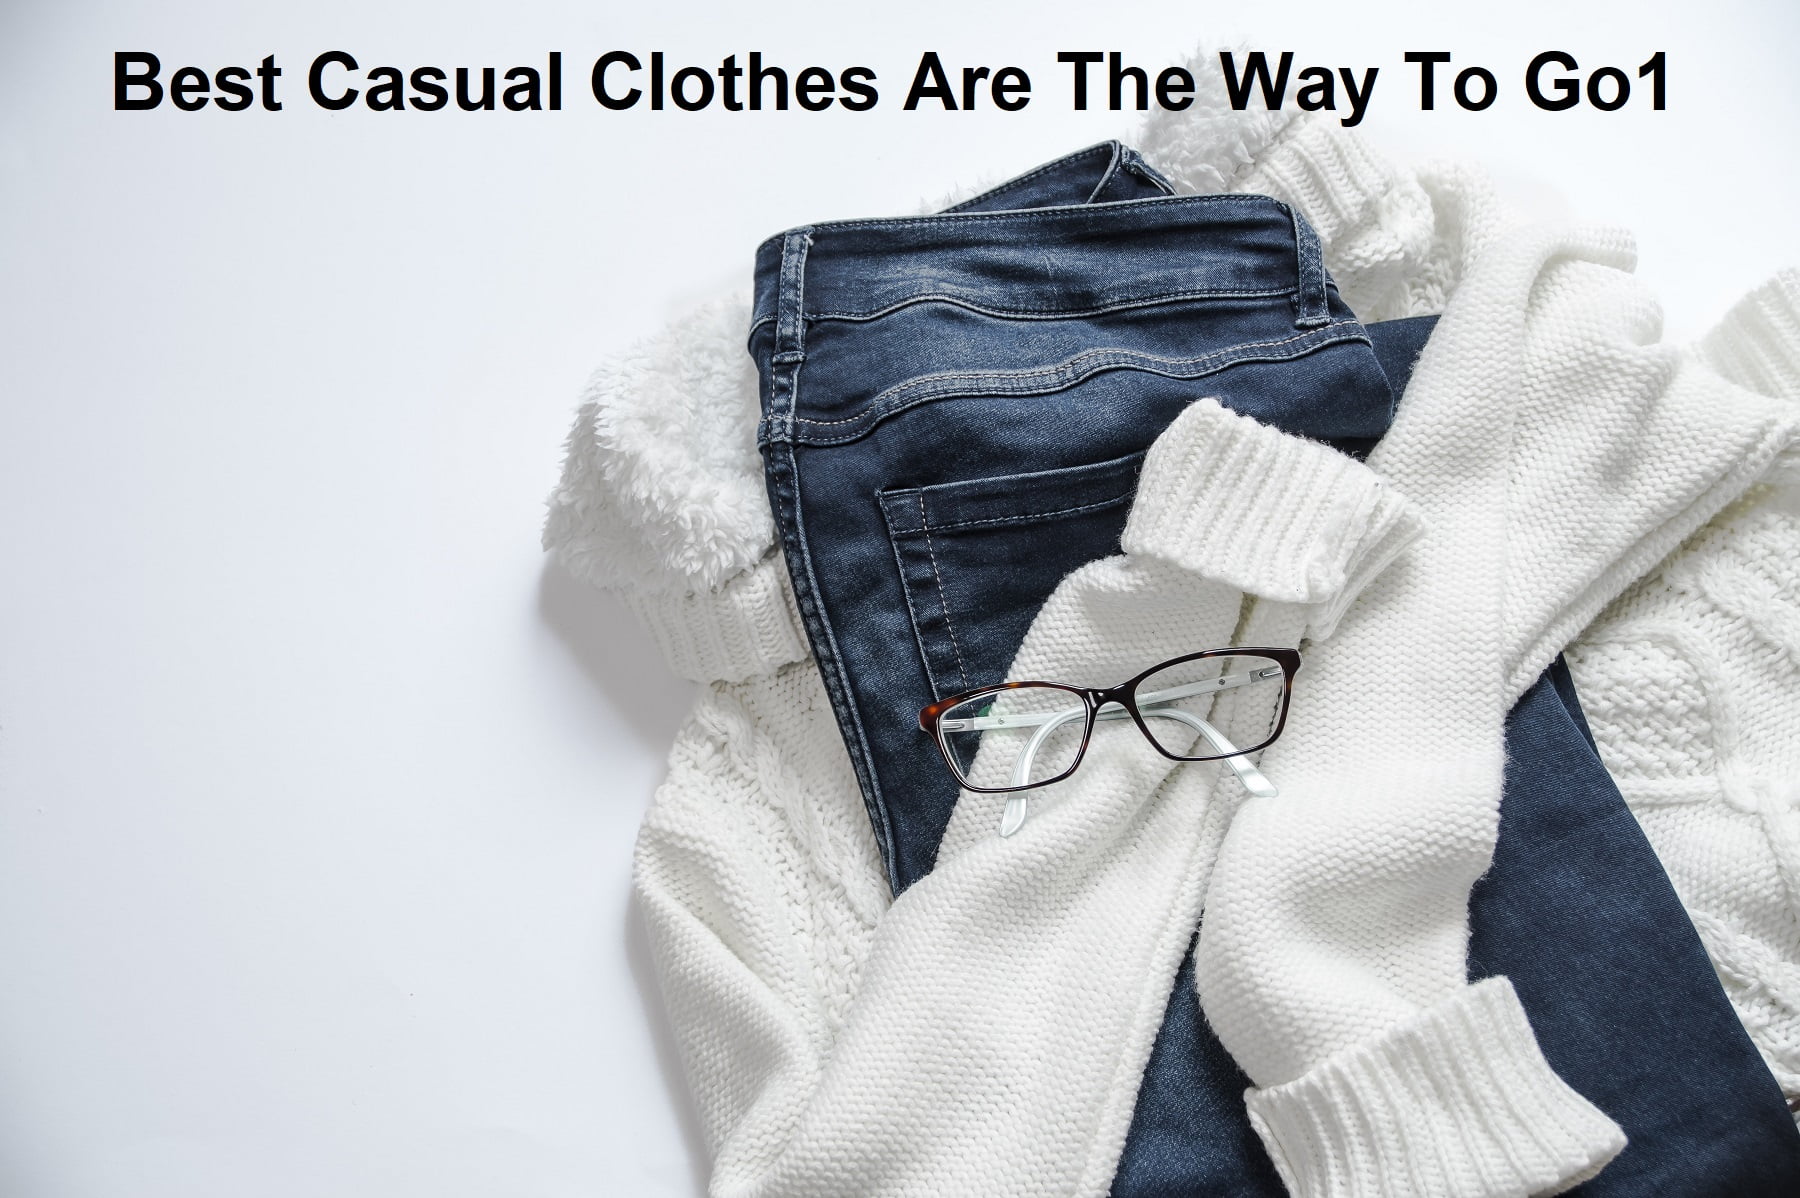 ﻿Best Casual Clothes Are The Way To Go1